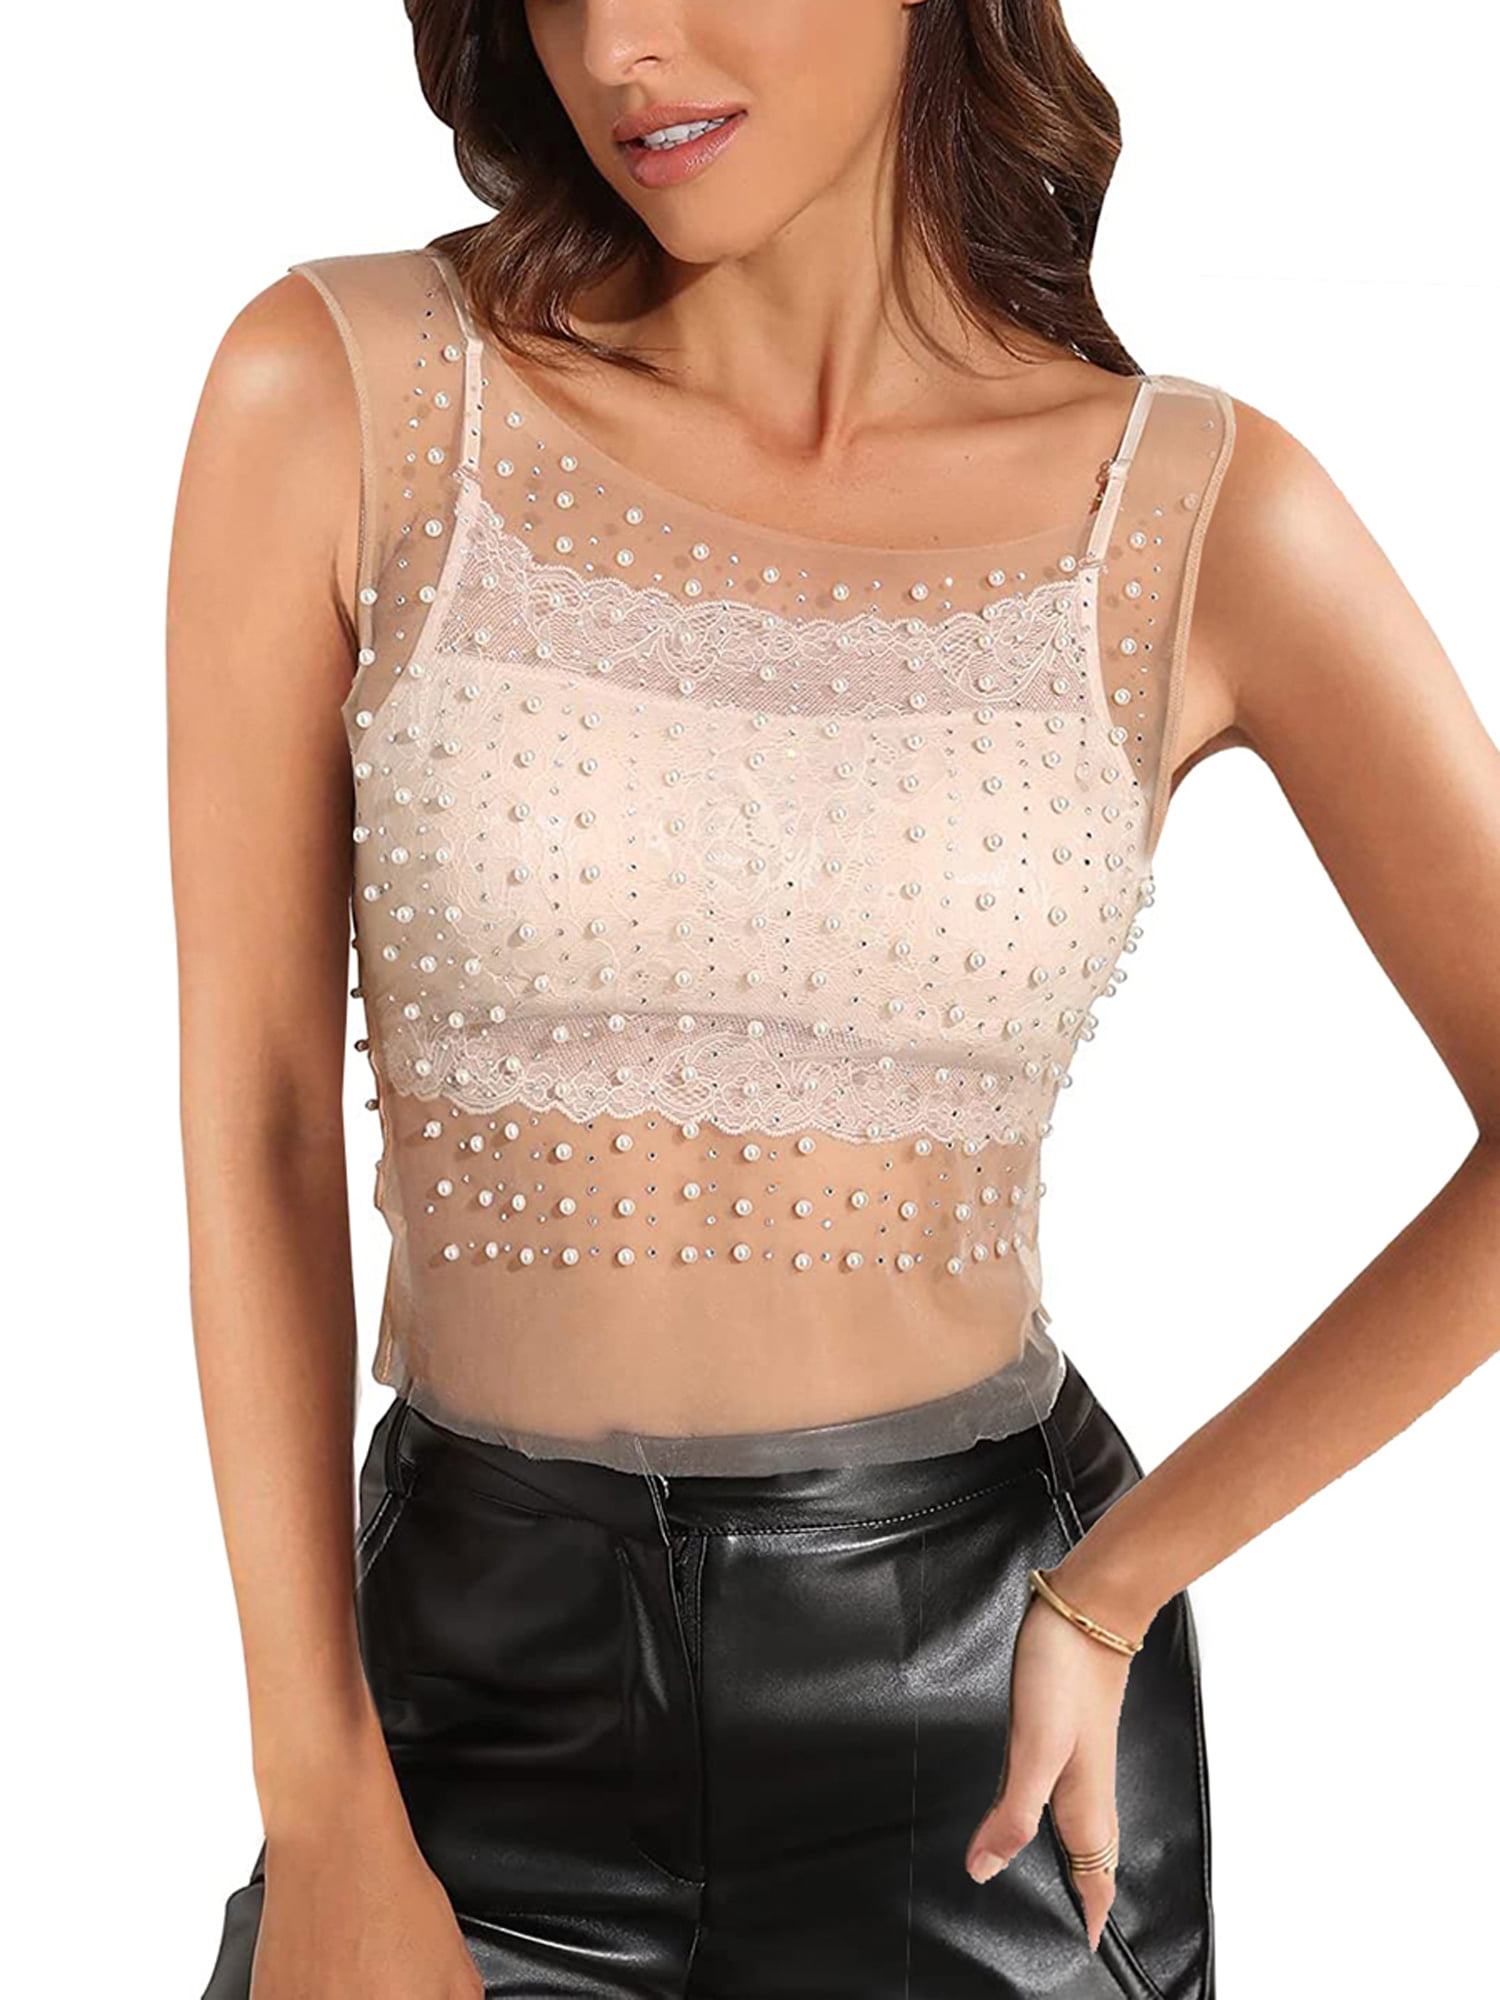 Thaisu Women's Sheer Mesh Crop Cami Tops Sleeveless See Through Tie-up  Front Slim Fitted Mini Vest Tops 